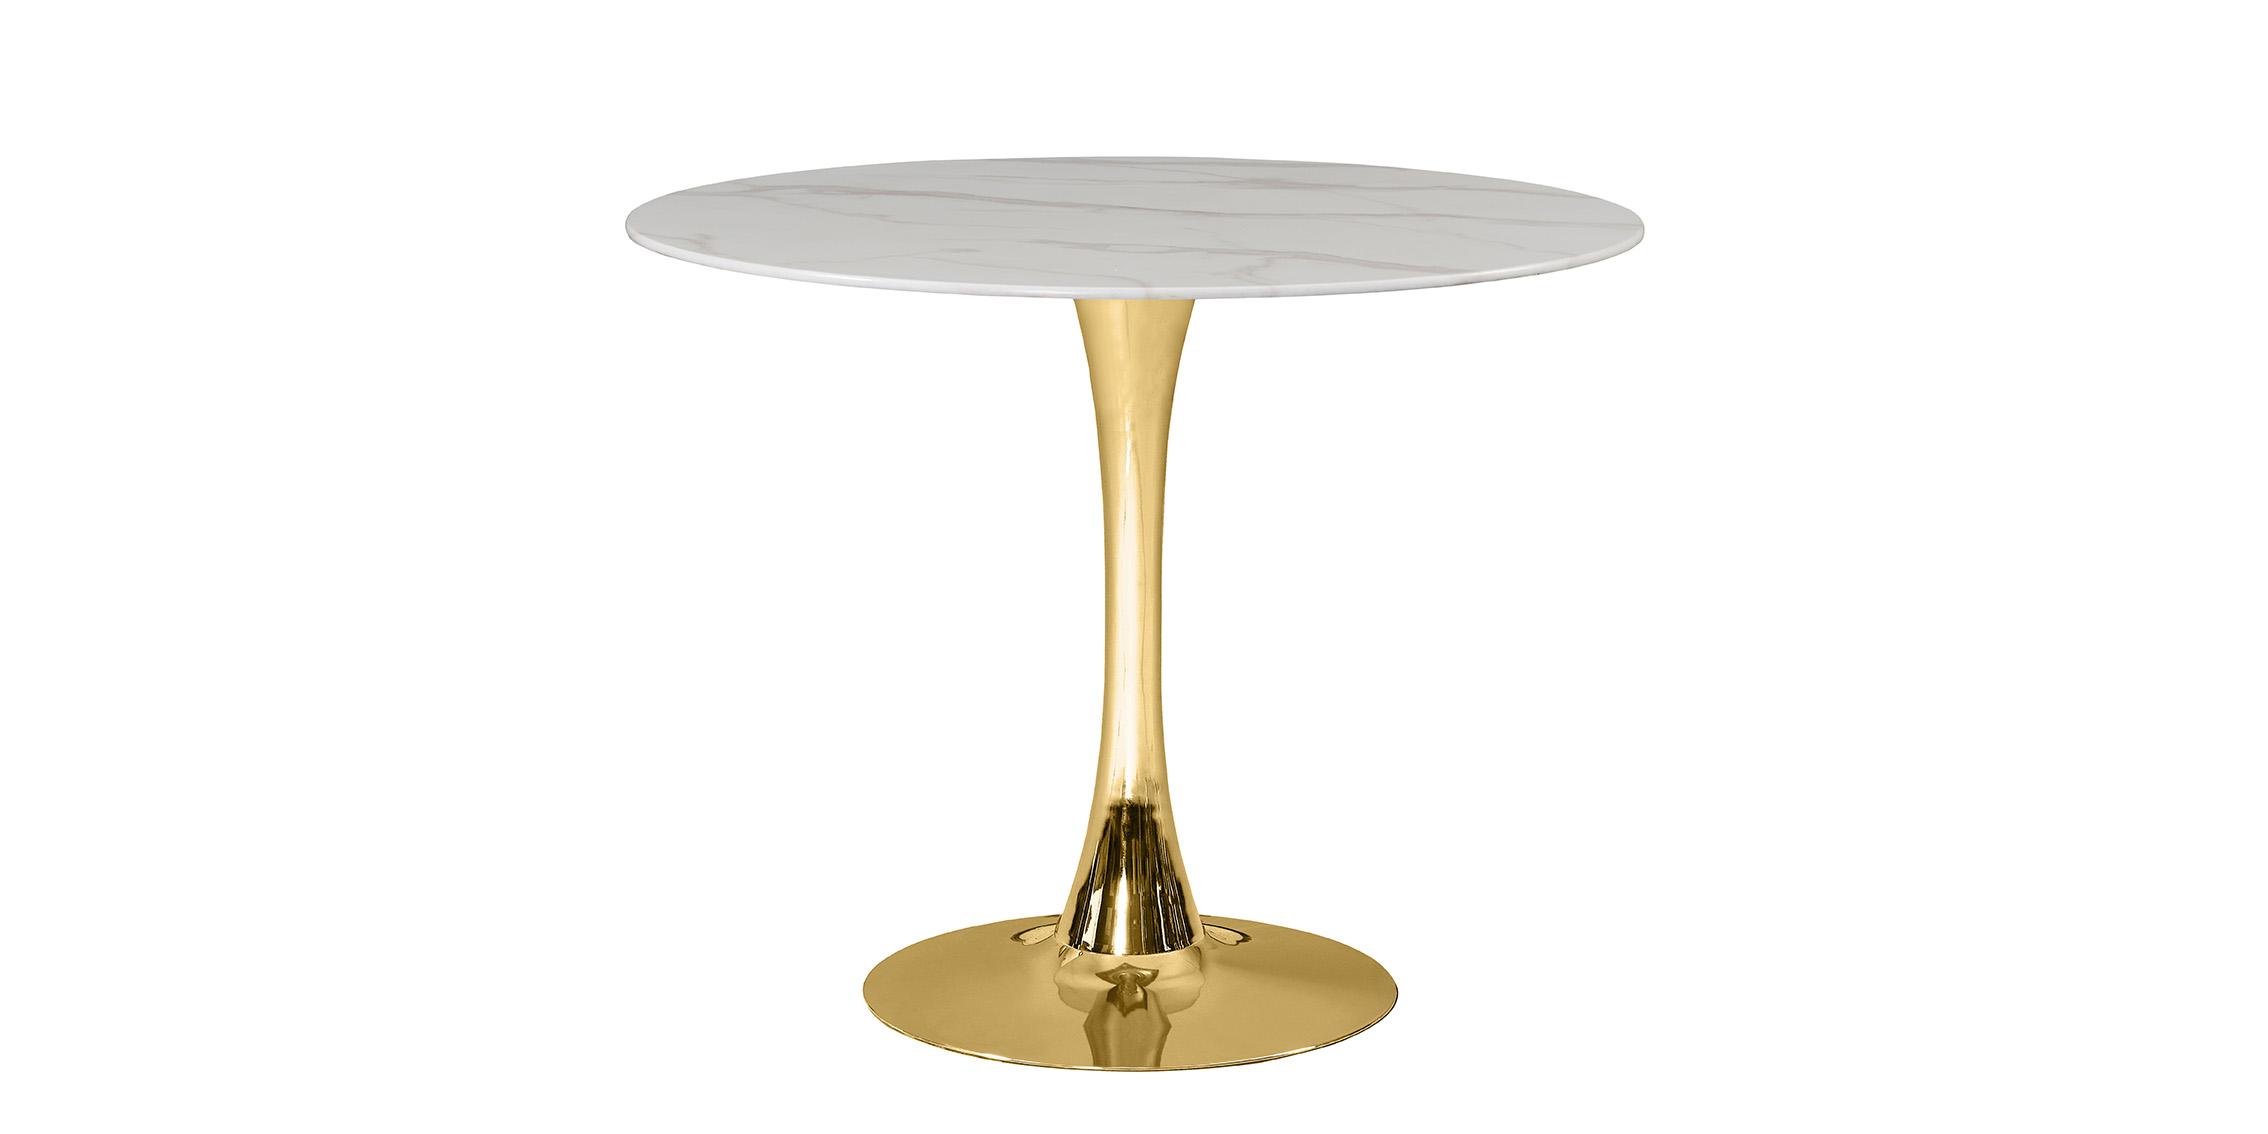 Contemporary, Modern Dining Table TULIP 971-T 971-T in White, Gold 